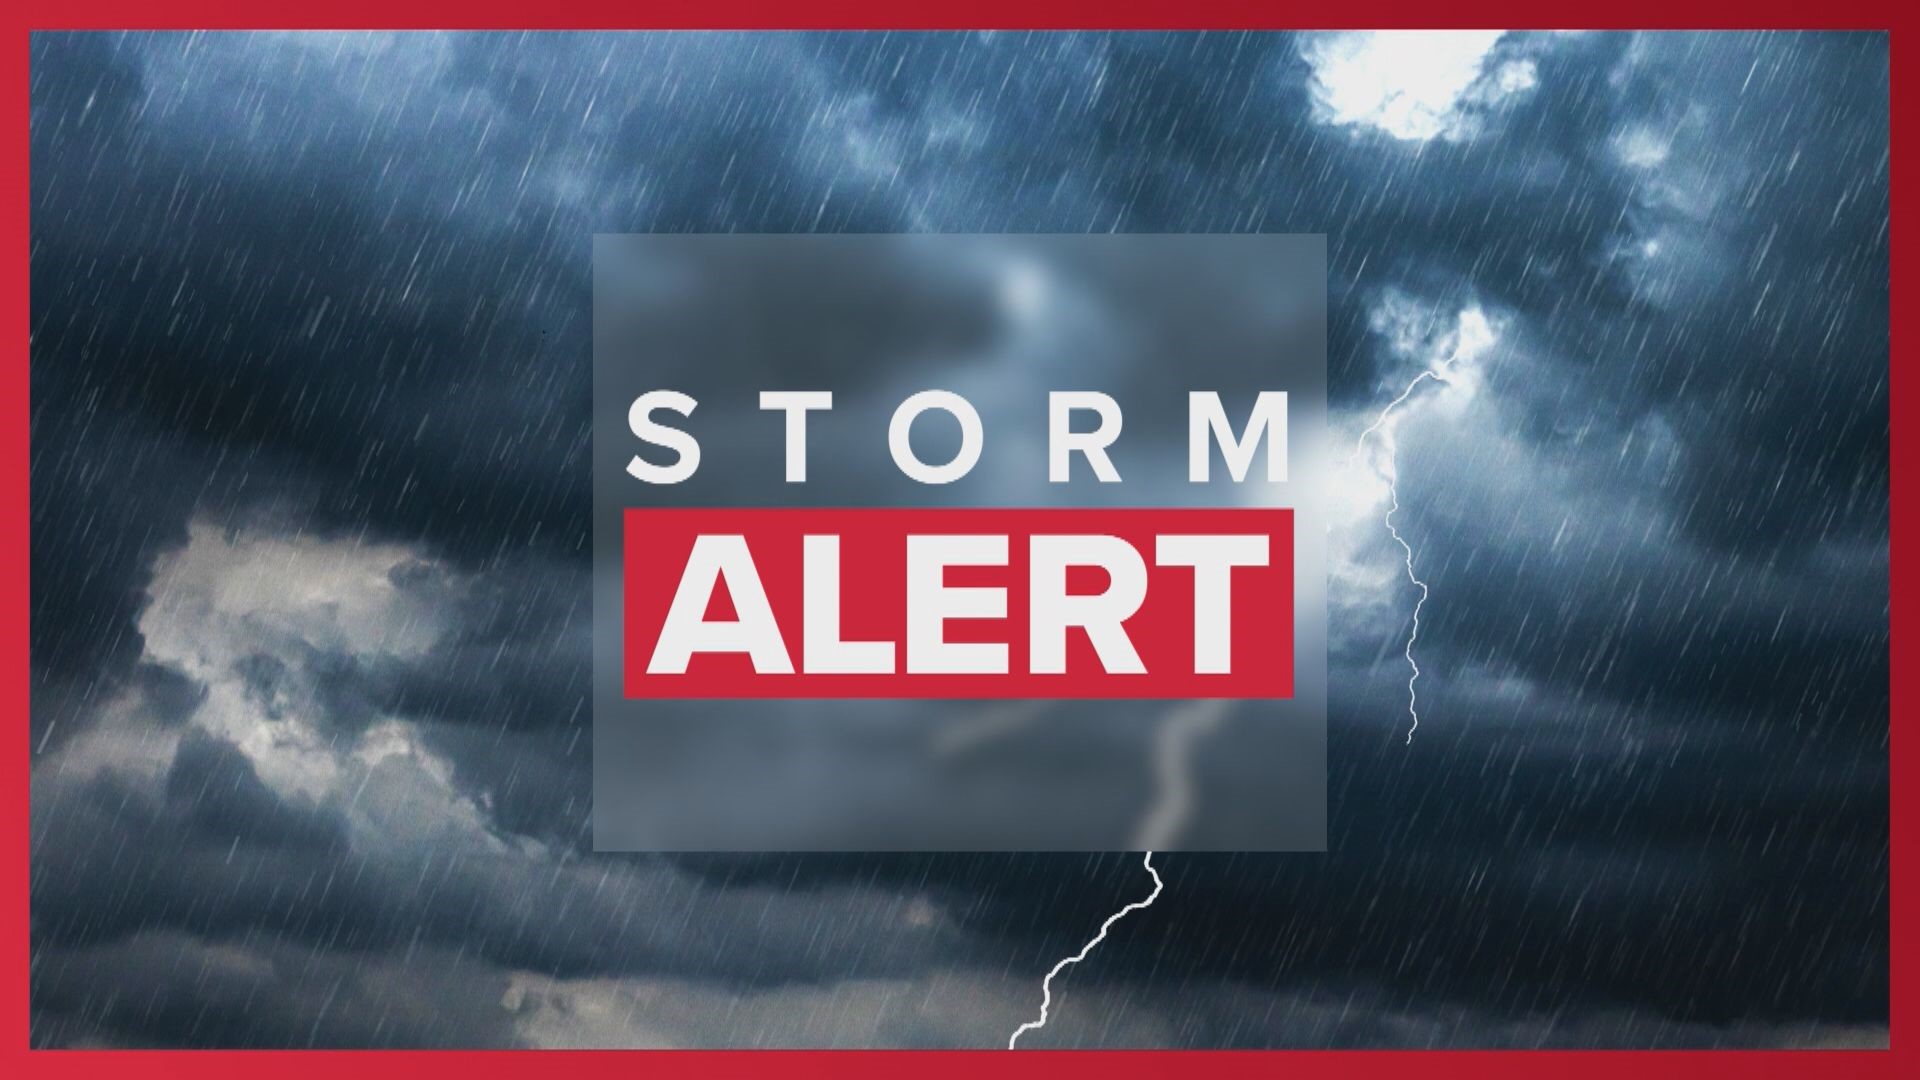 Met. Scott Connell shares intermittent updates as a severe thunderstorm warning was issued for parts of the coverage area.